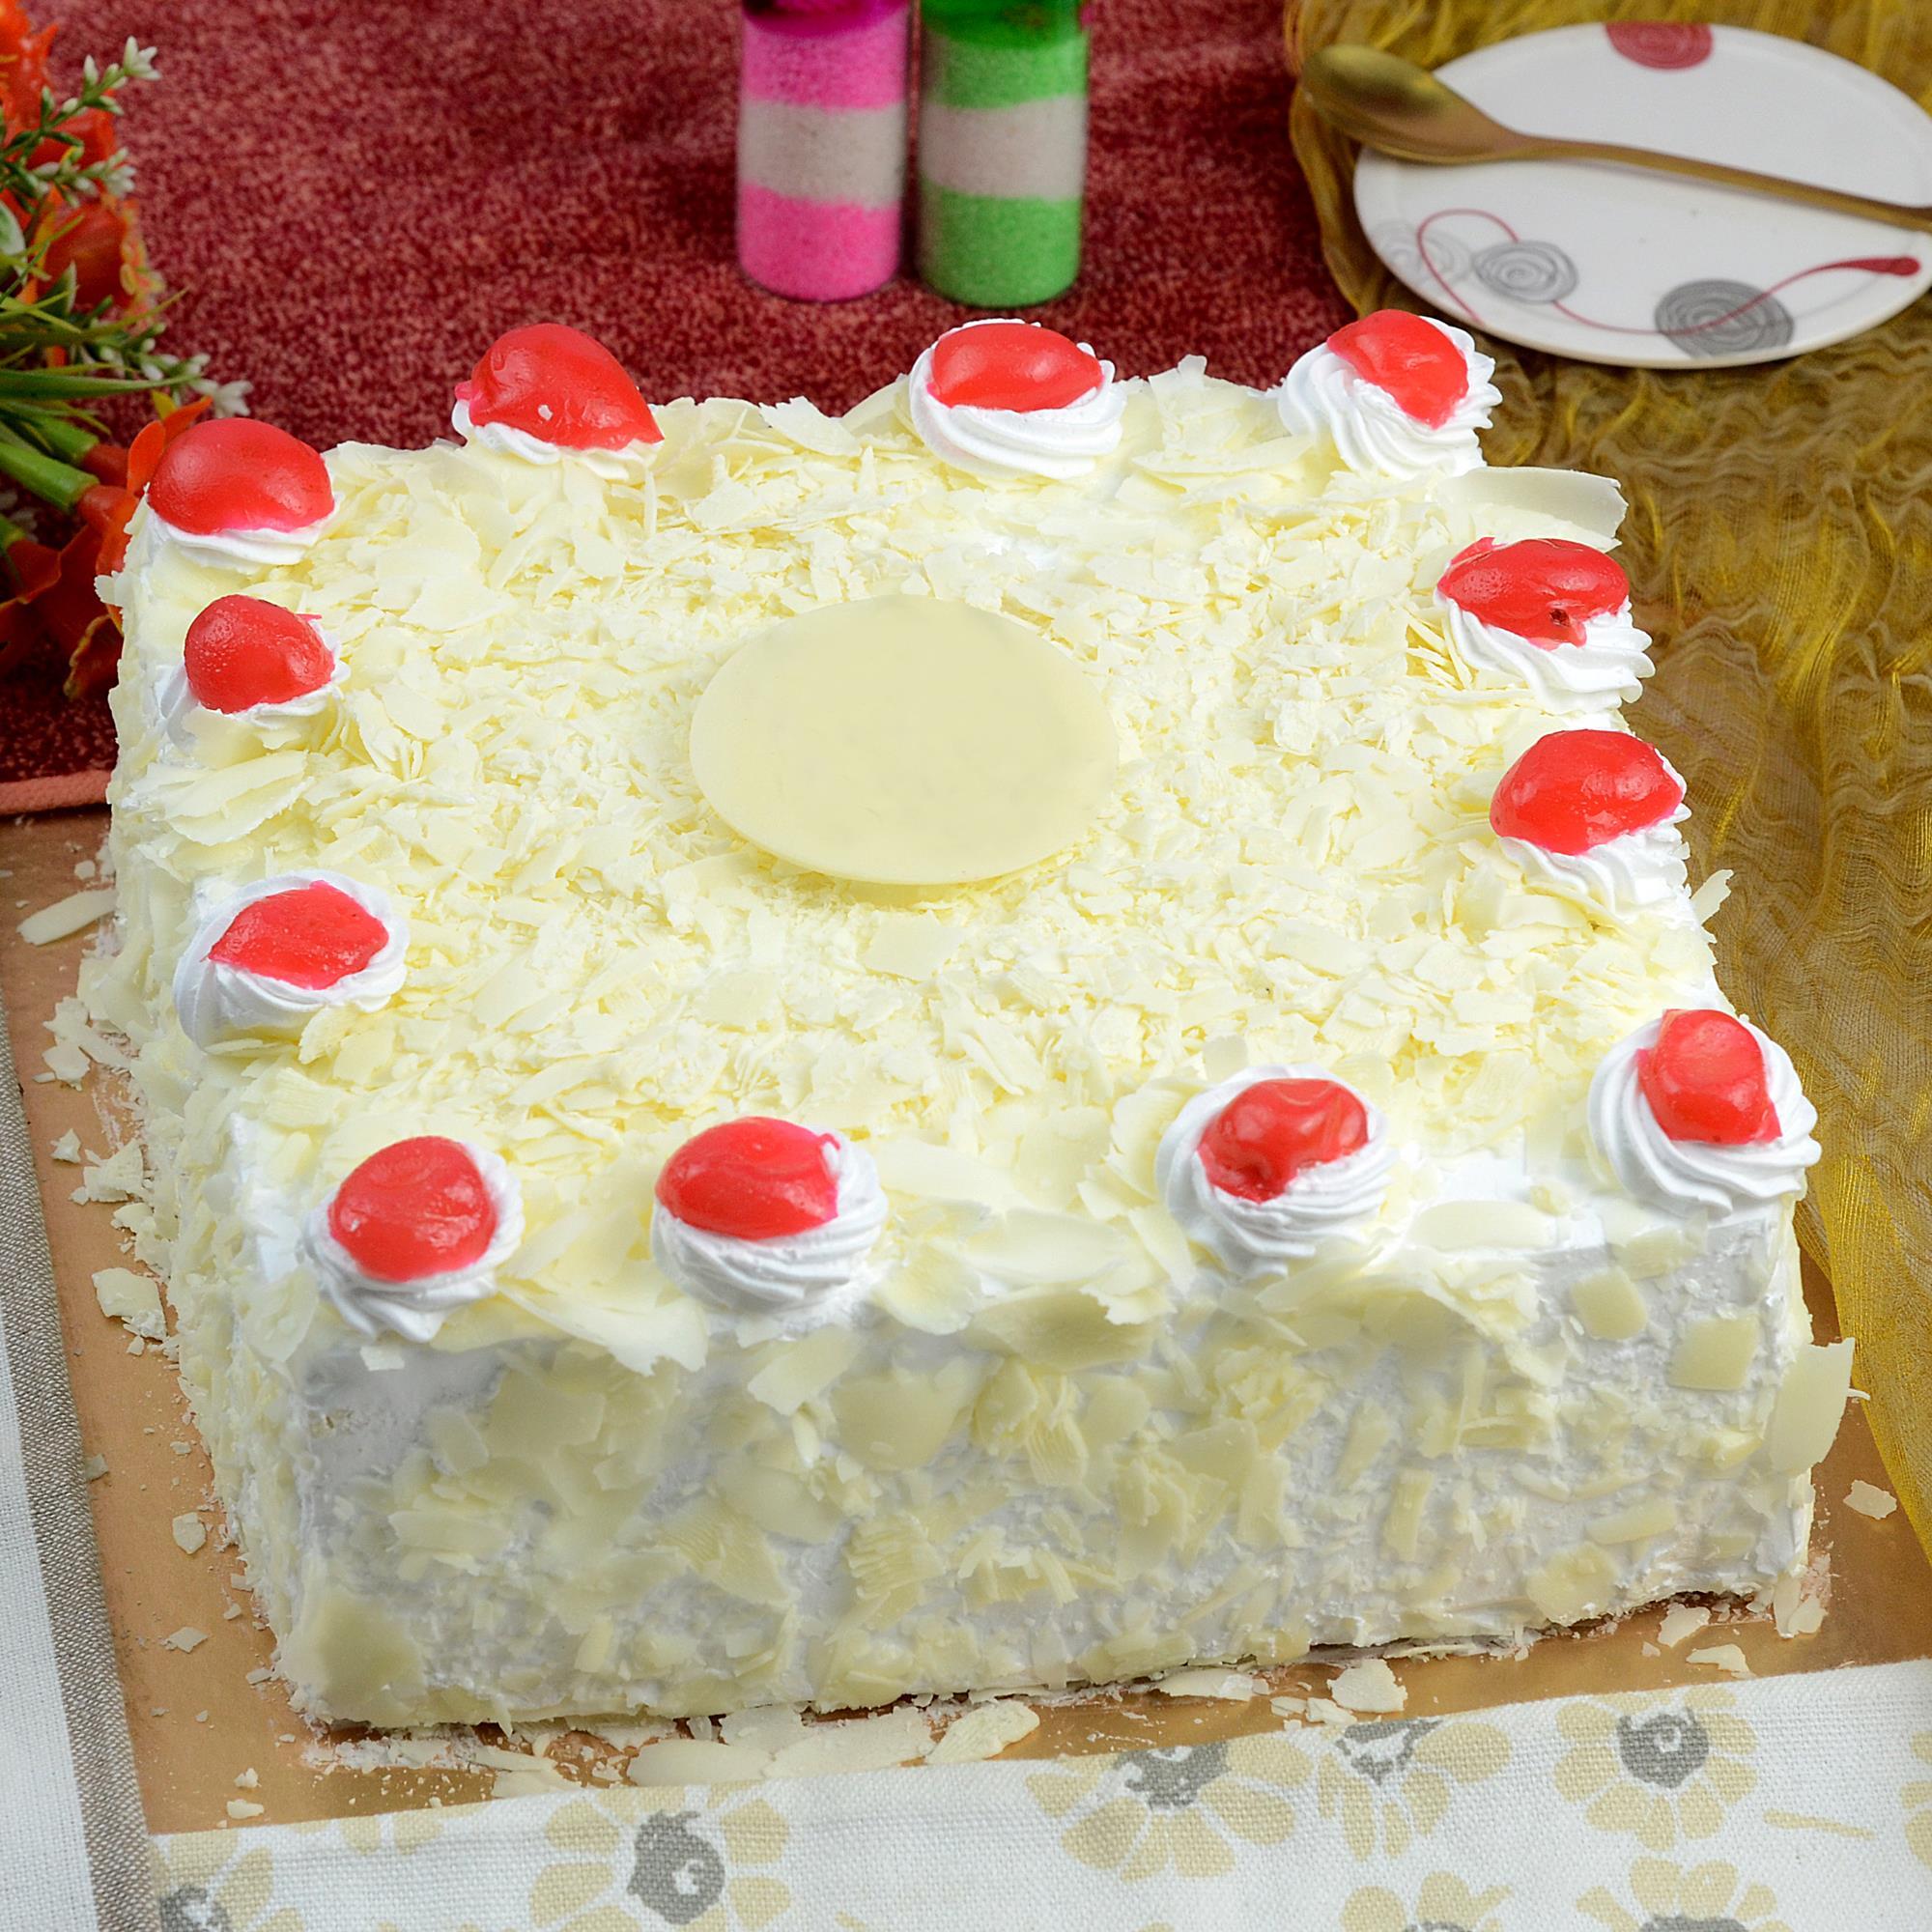 Cake City - Order A 1Kg Cake For Only Ksh 1500. They are... | Facebook